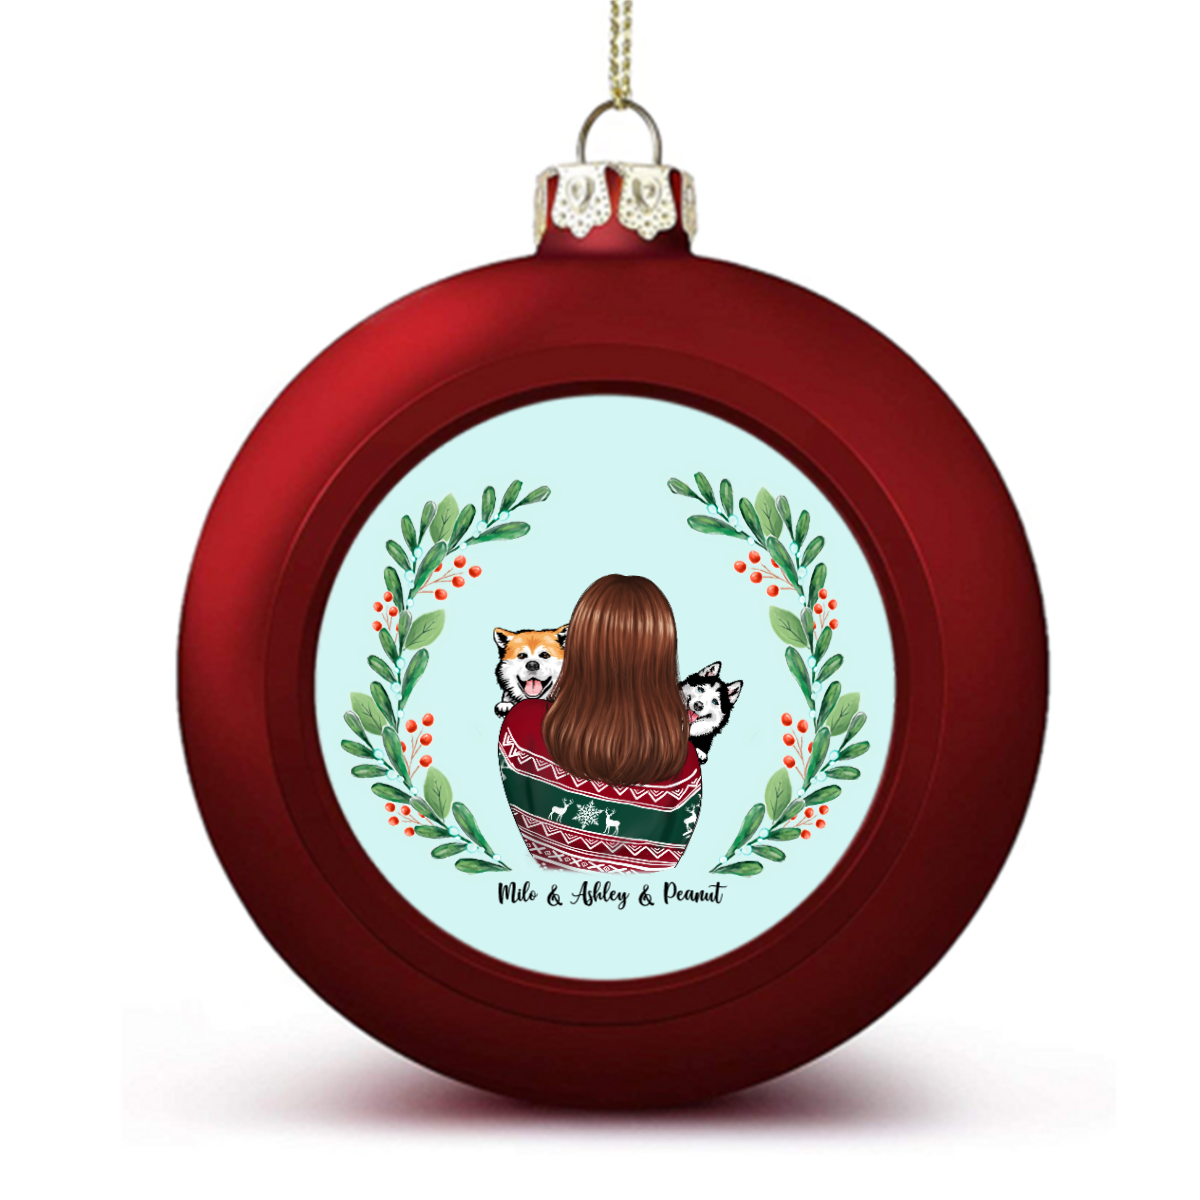 Woman Holding Dog Cat Christmas Personalized Ball Ornaments